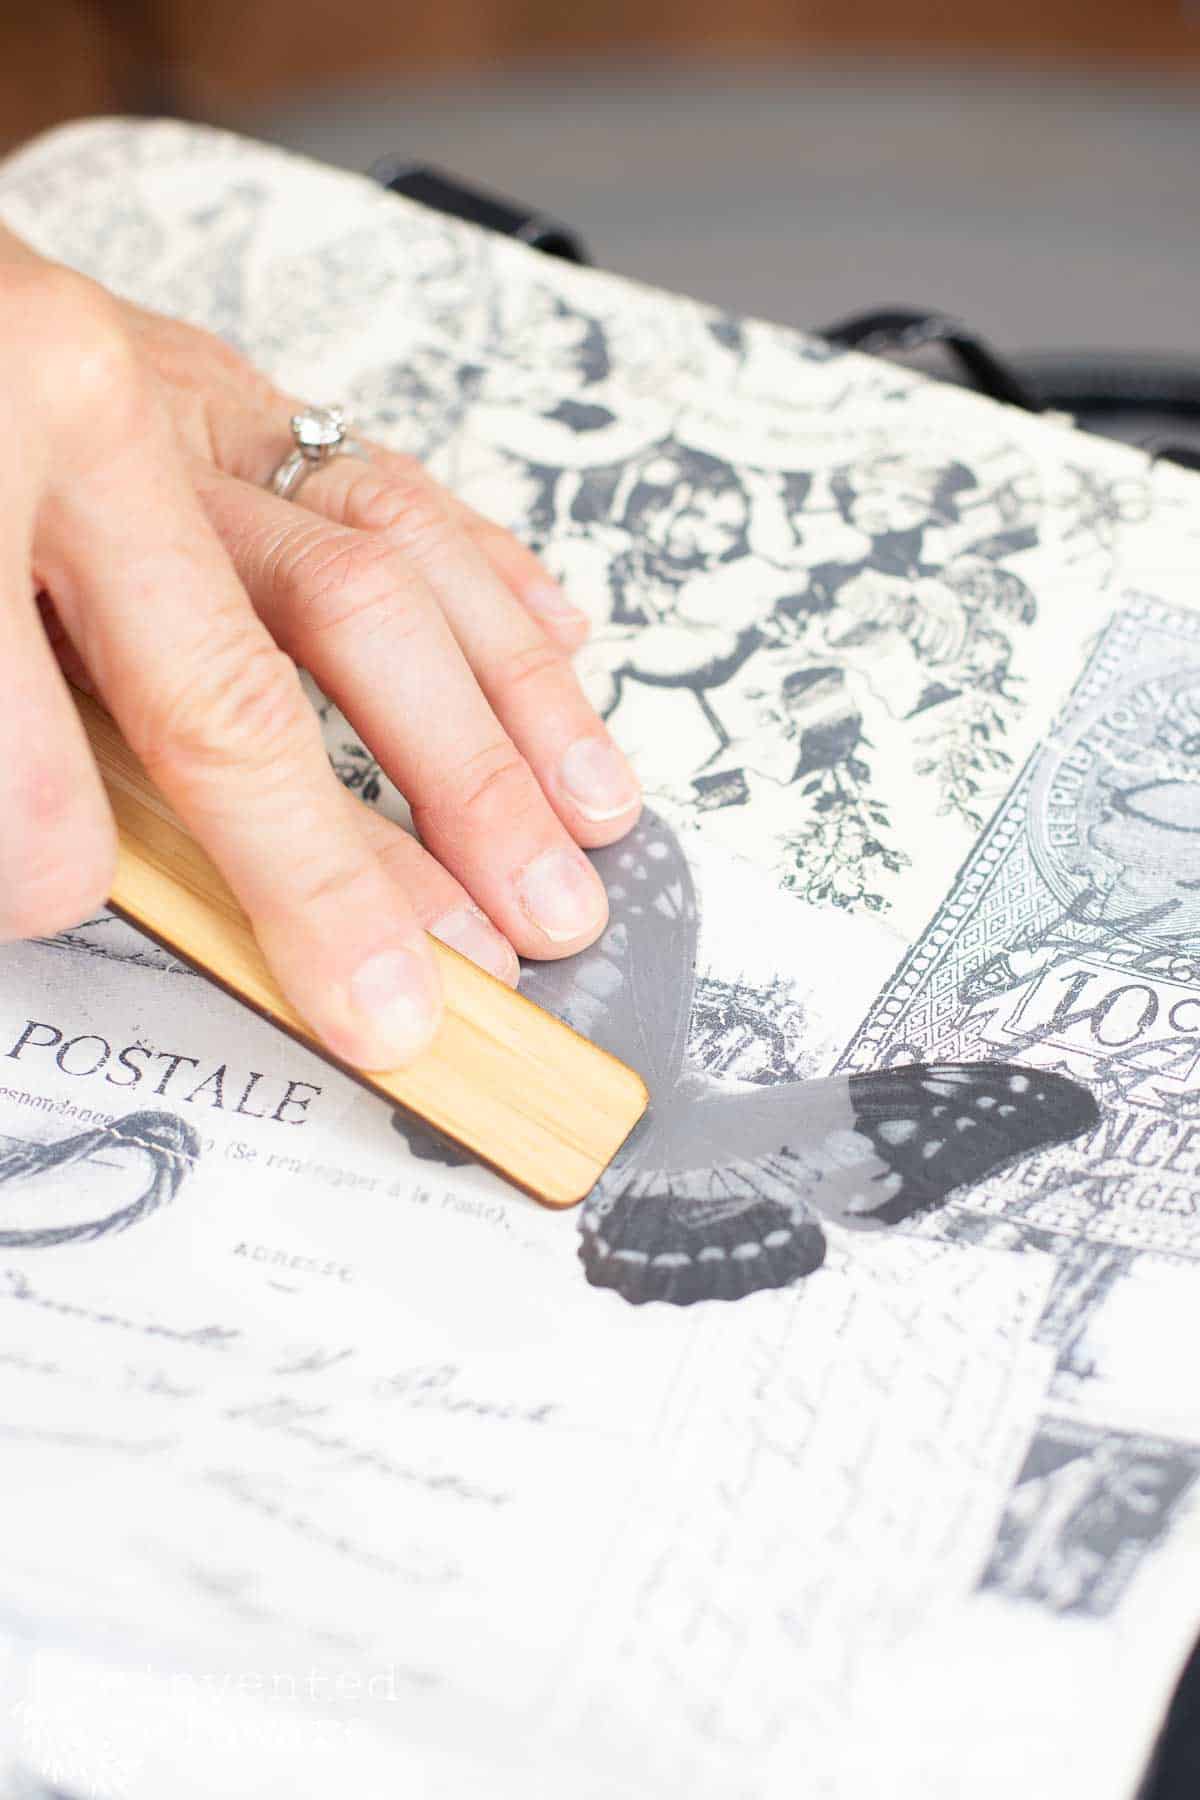 lady applying a decorative transfer to fabric tote bag